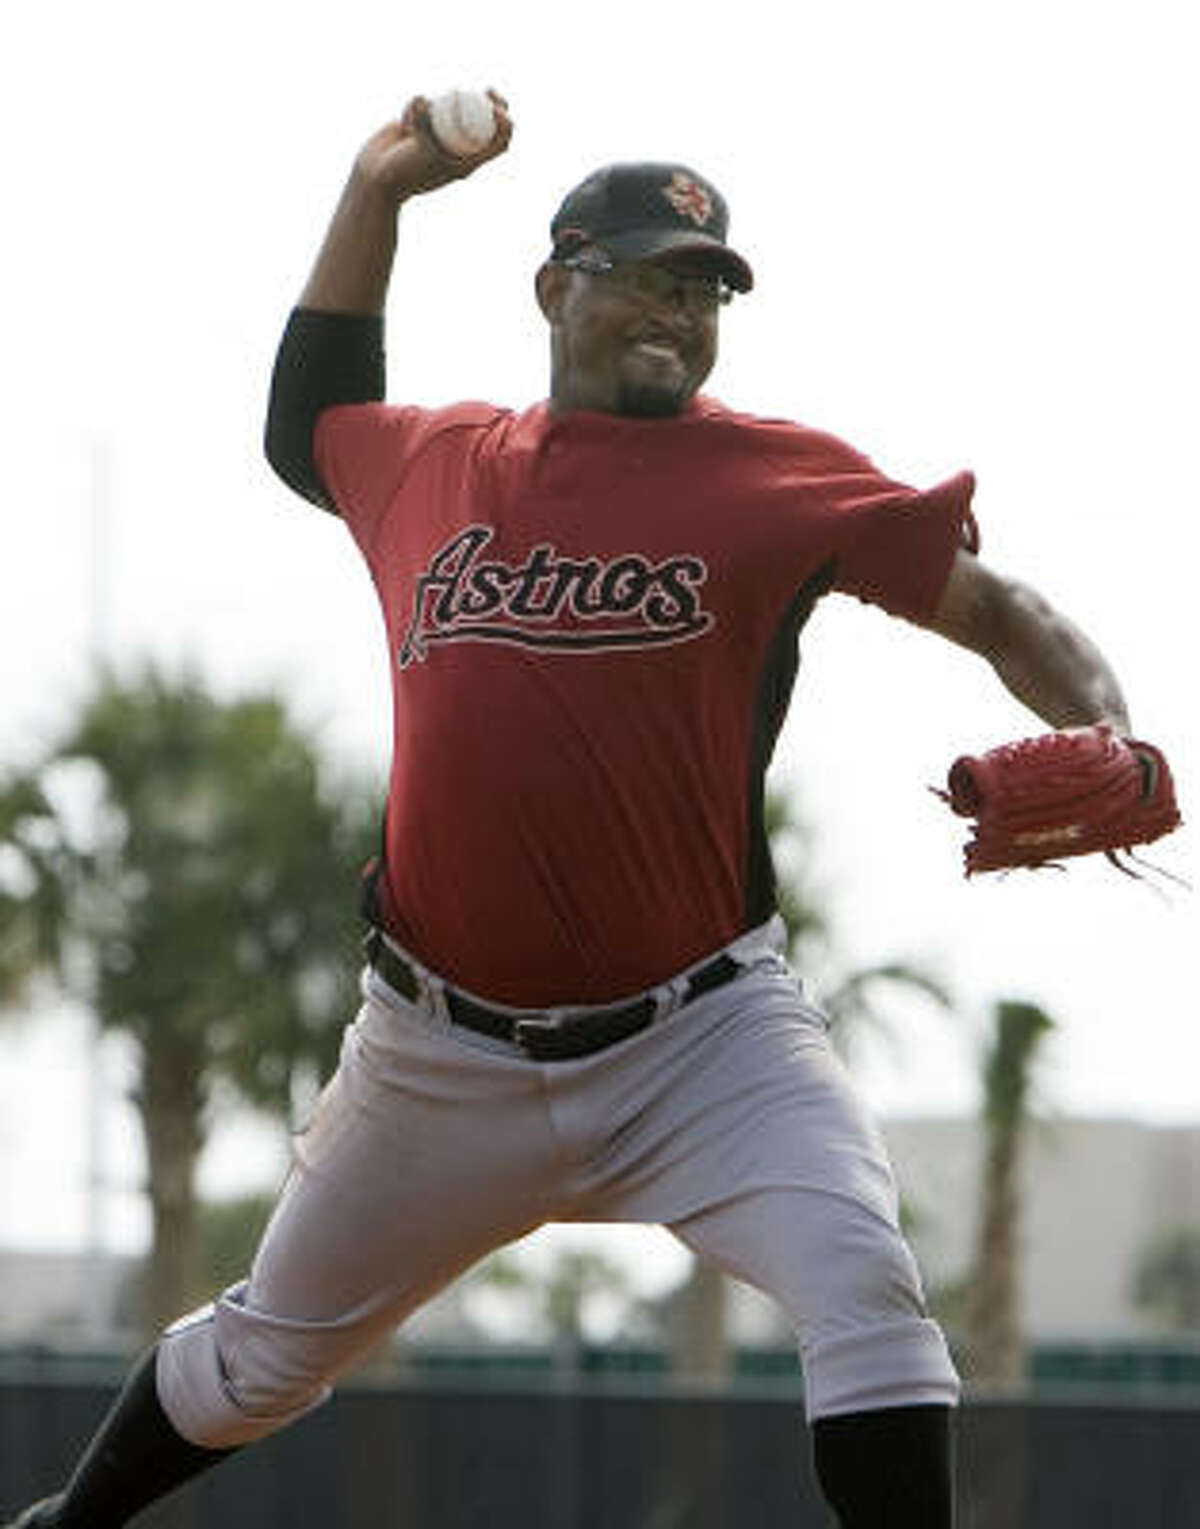 Jose Valverde throws a pitch during a session of live batting practice.